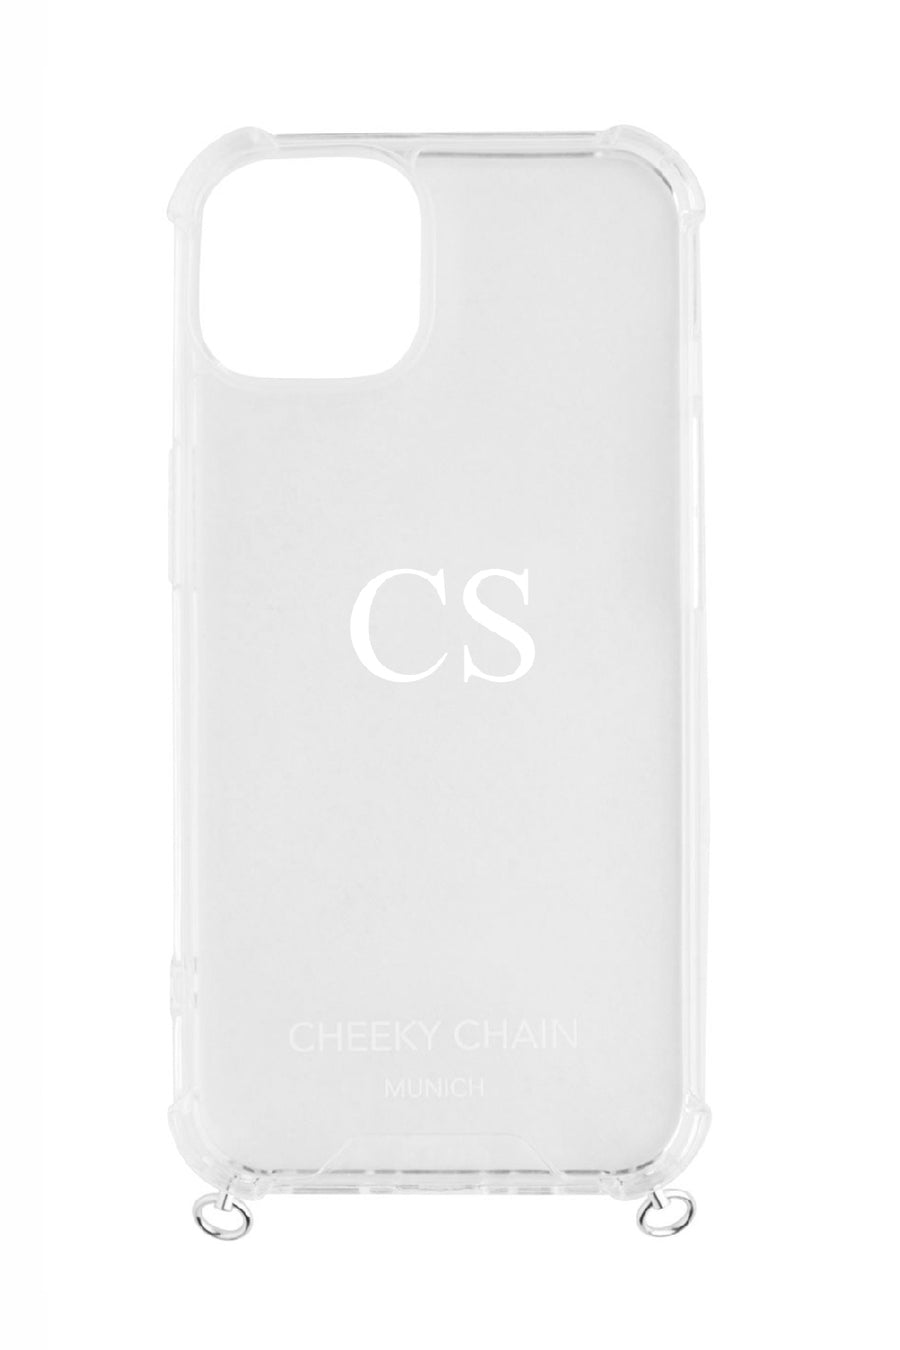 Mobile phone case crystal clear personalized